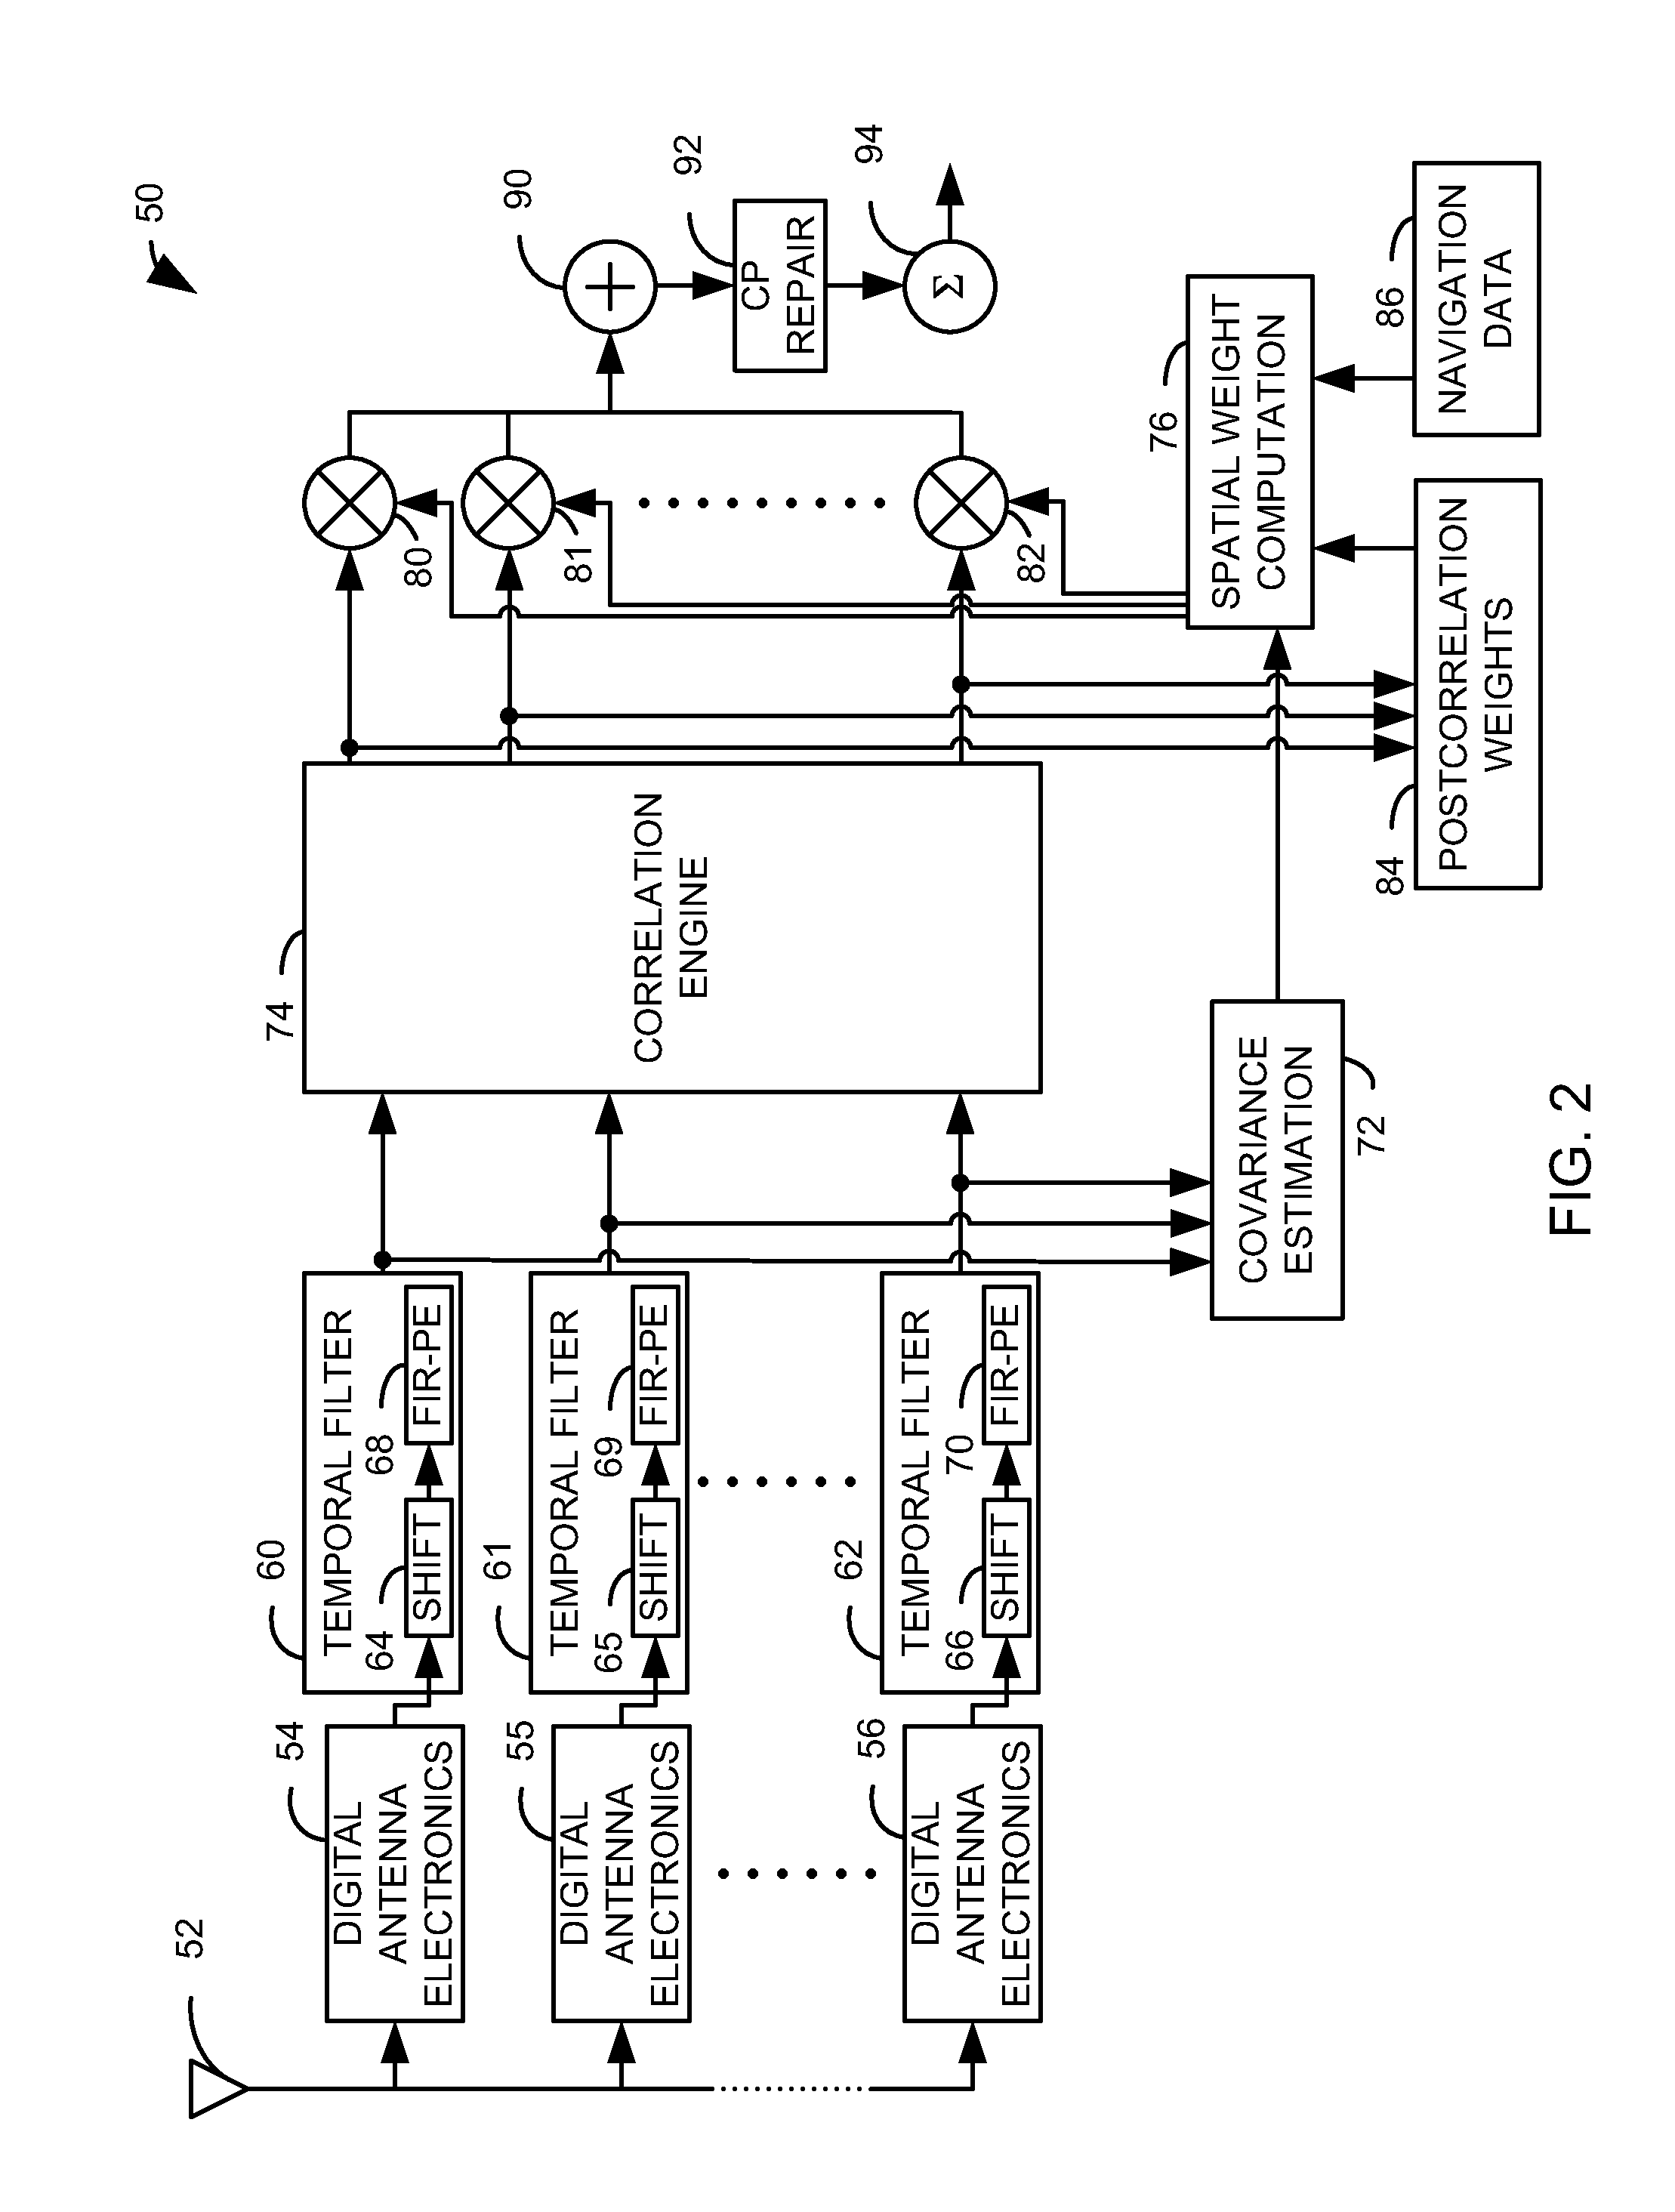 Digital beamforming for simultaneously mitigating weak and strong interference in a navigation system